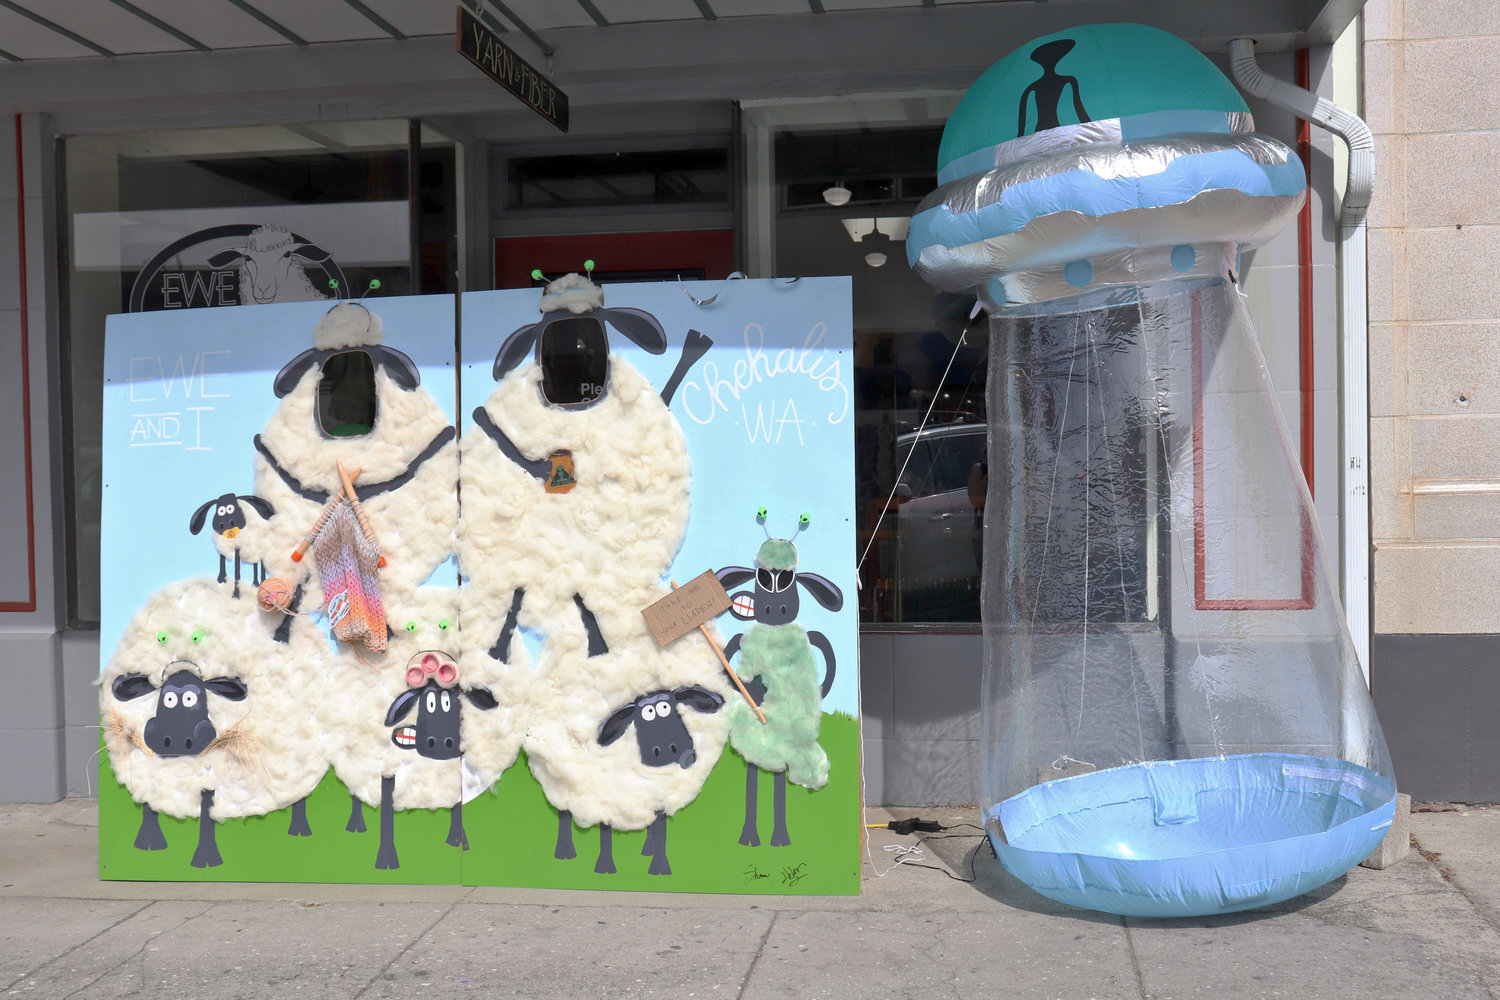 An alien-themed photo booth sits outside Ewe and I yarn store in Chehalis during the Chehalis Flying Saucer Party on Saturday.